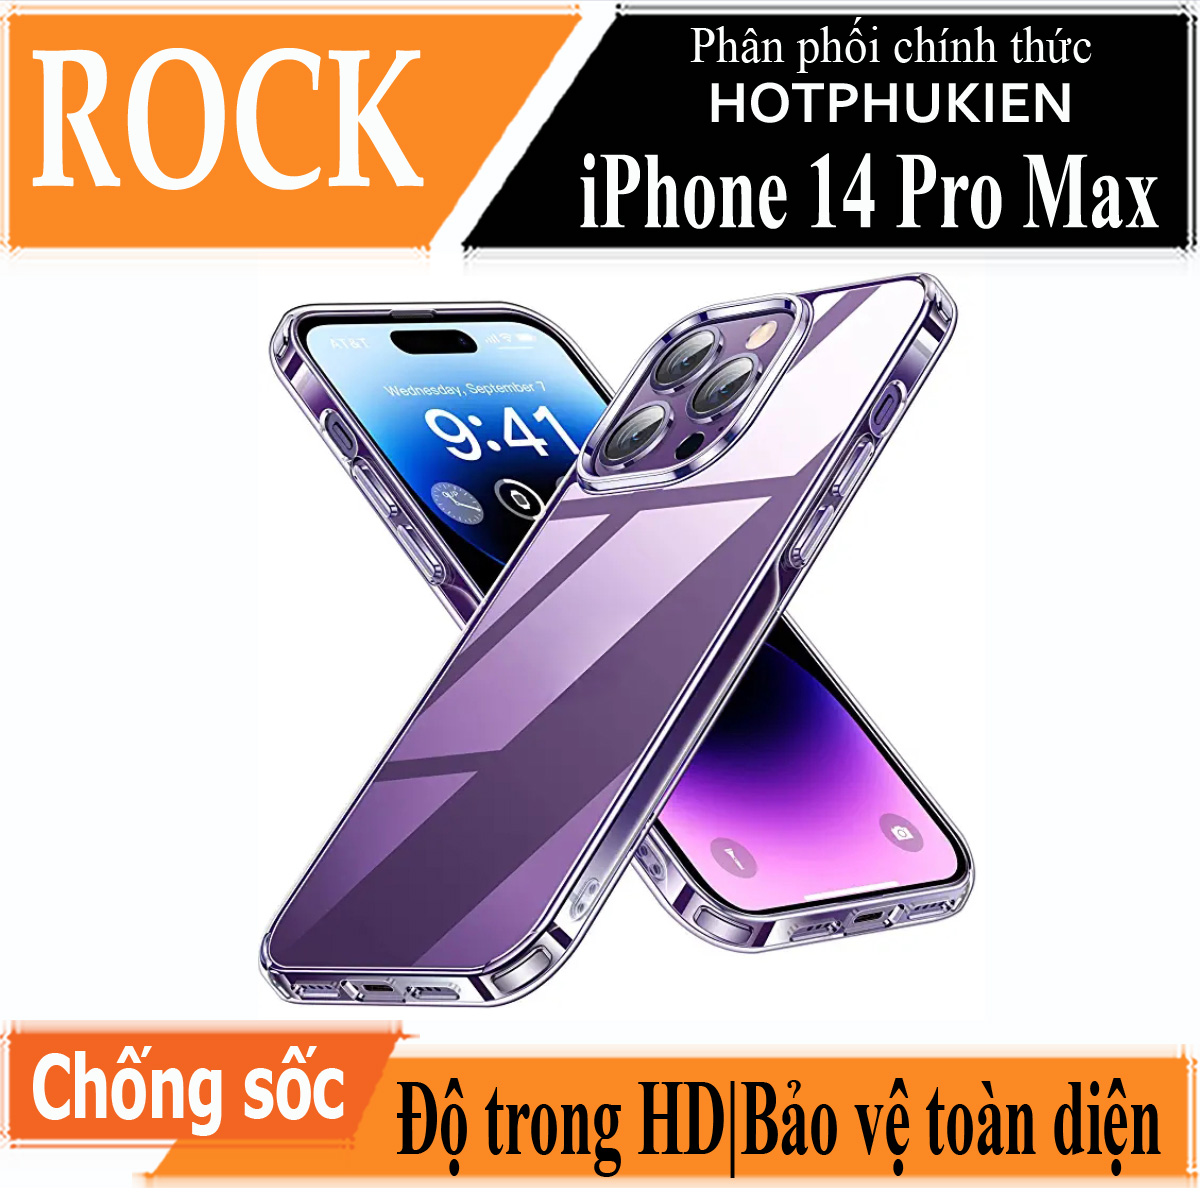 Ốp lưng chống sốc trong suốt cho iPhone 14 Pro Max (6.7 inch) hiệu Rock Space Protective Case